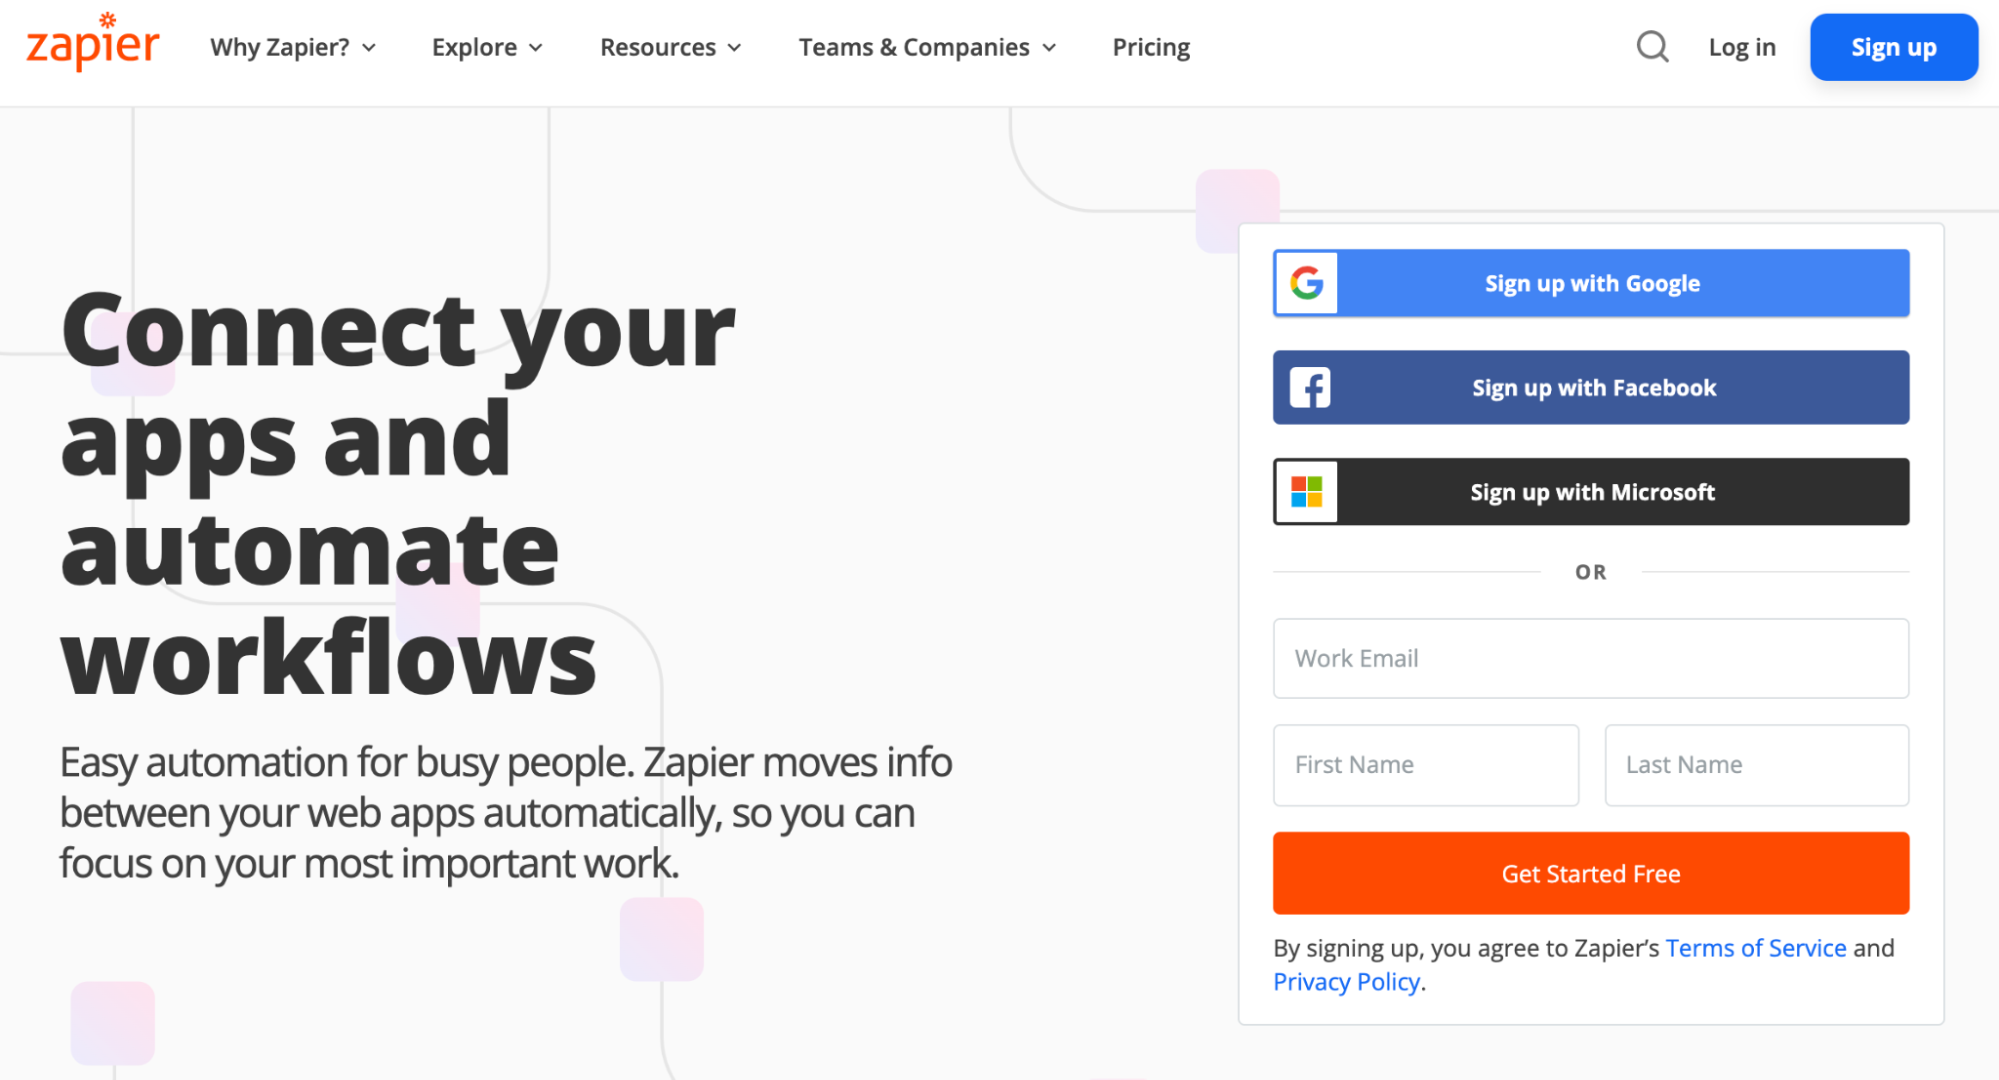 Zapier makes signing up very easy, maybe too easy.